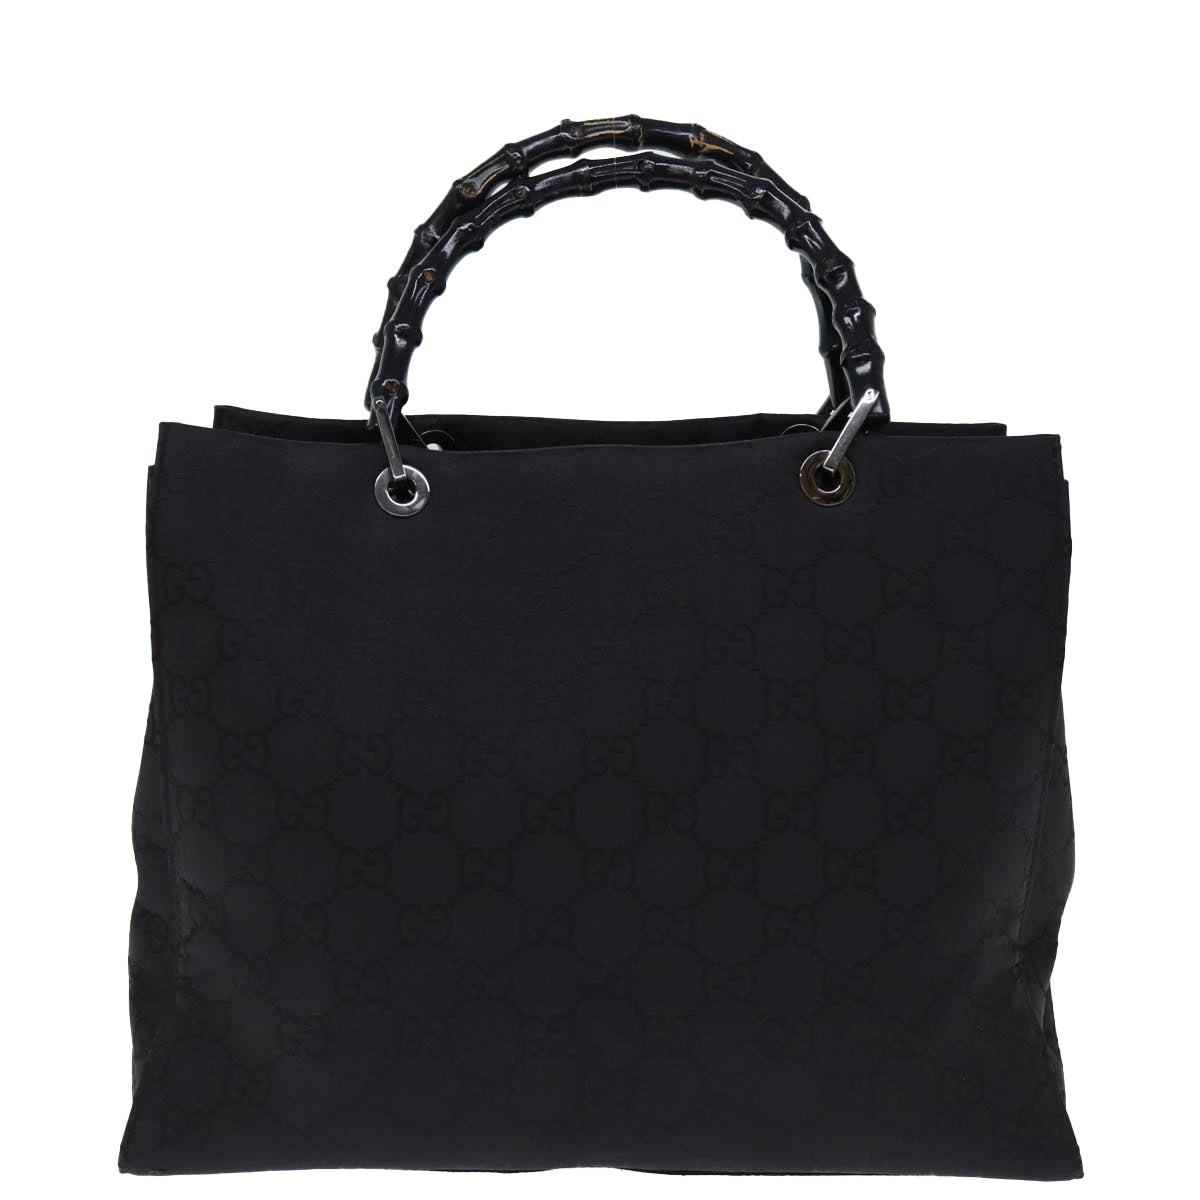 GUCCI Bamboo GG Canvas Hand Bag Black 002 1010 Auth yk12489